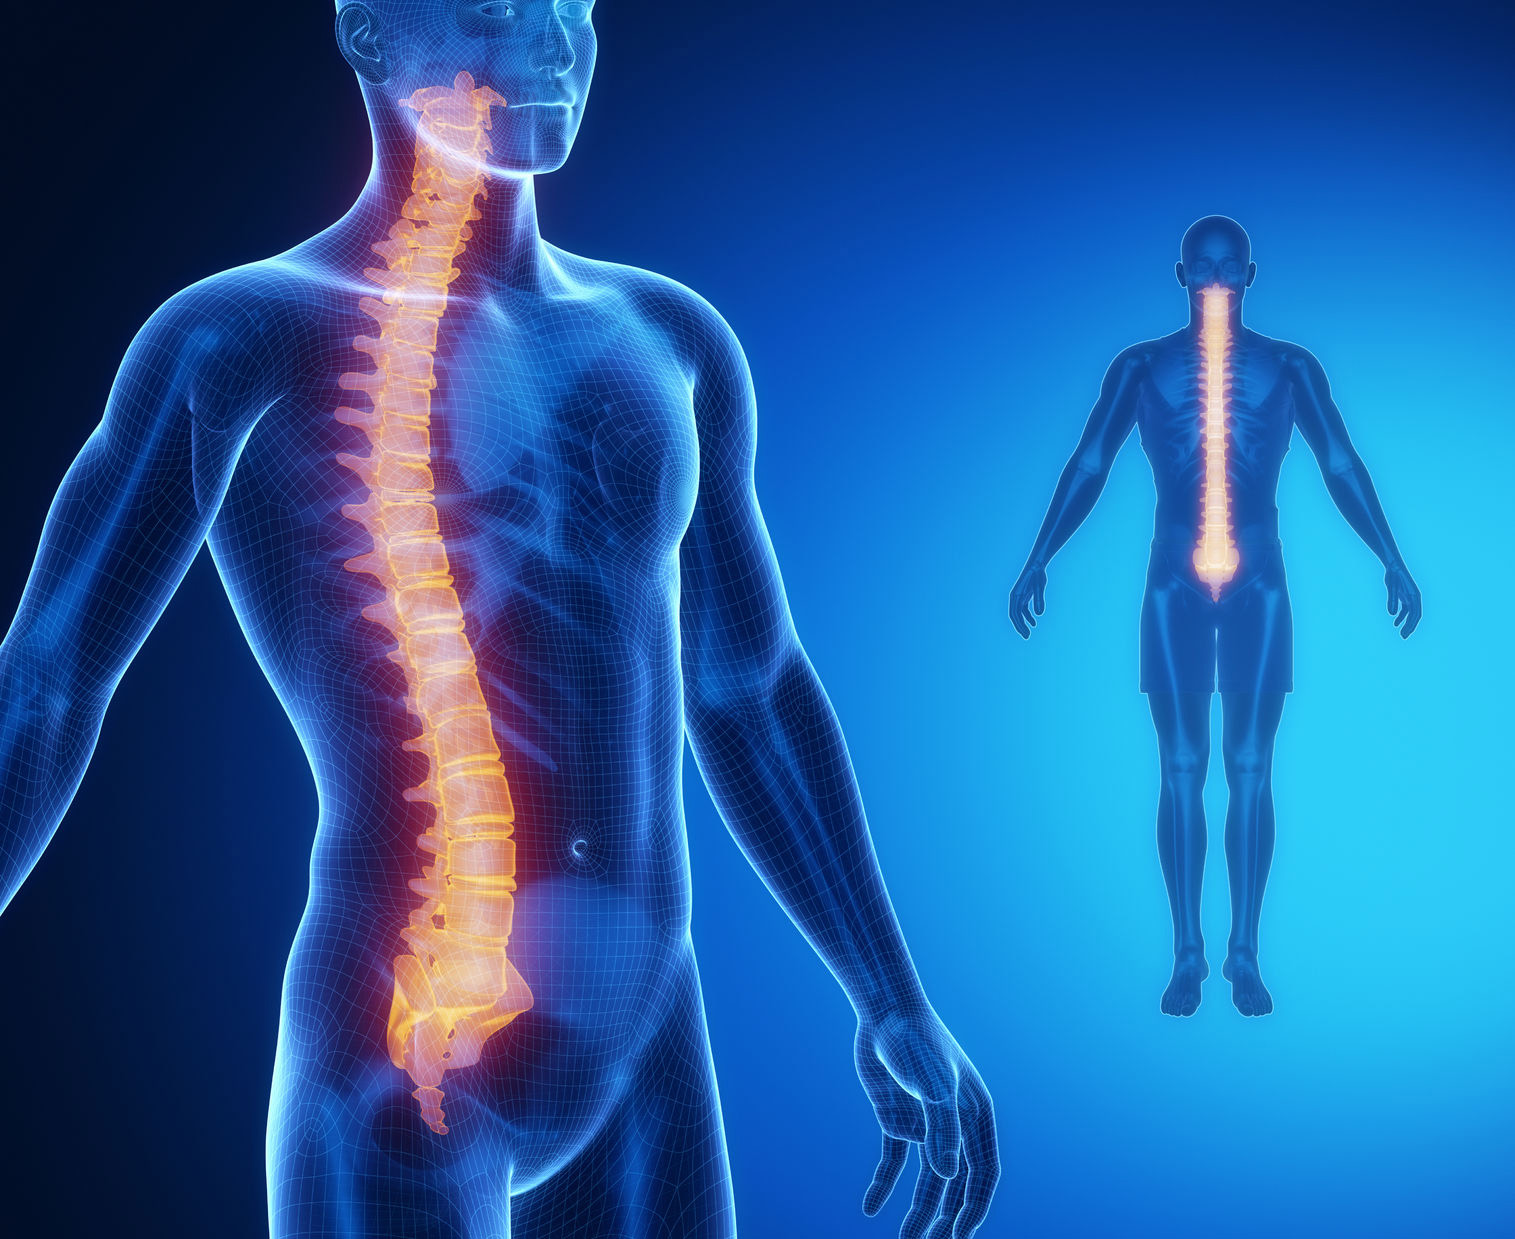 Spinal Cord Stimulation : University Pain and Spine Center